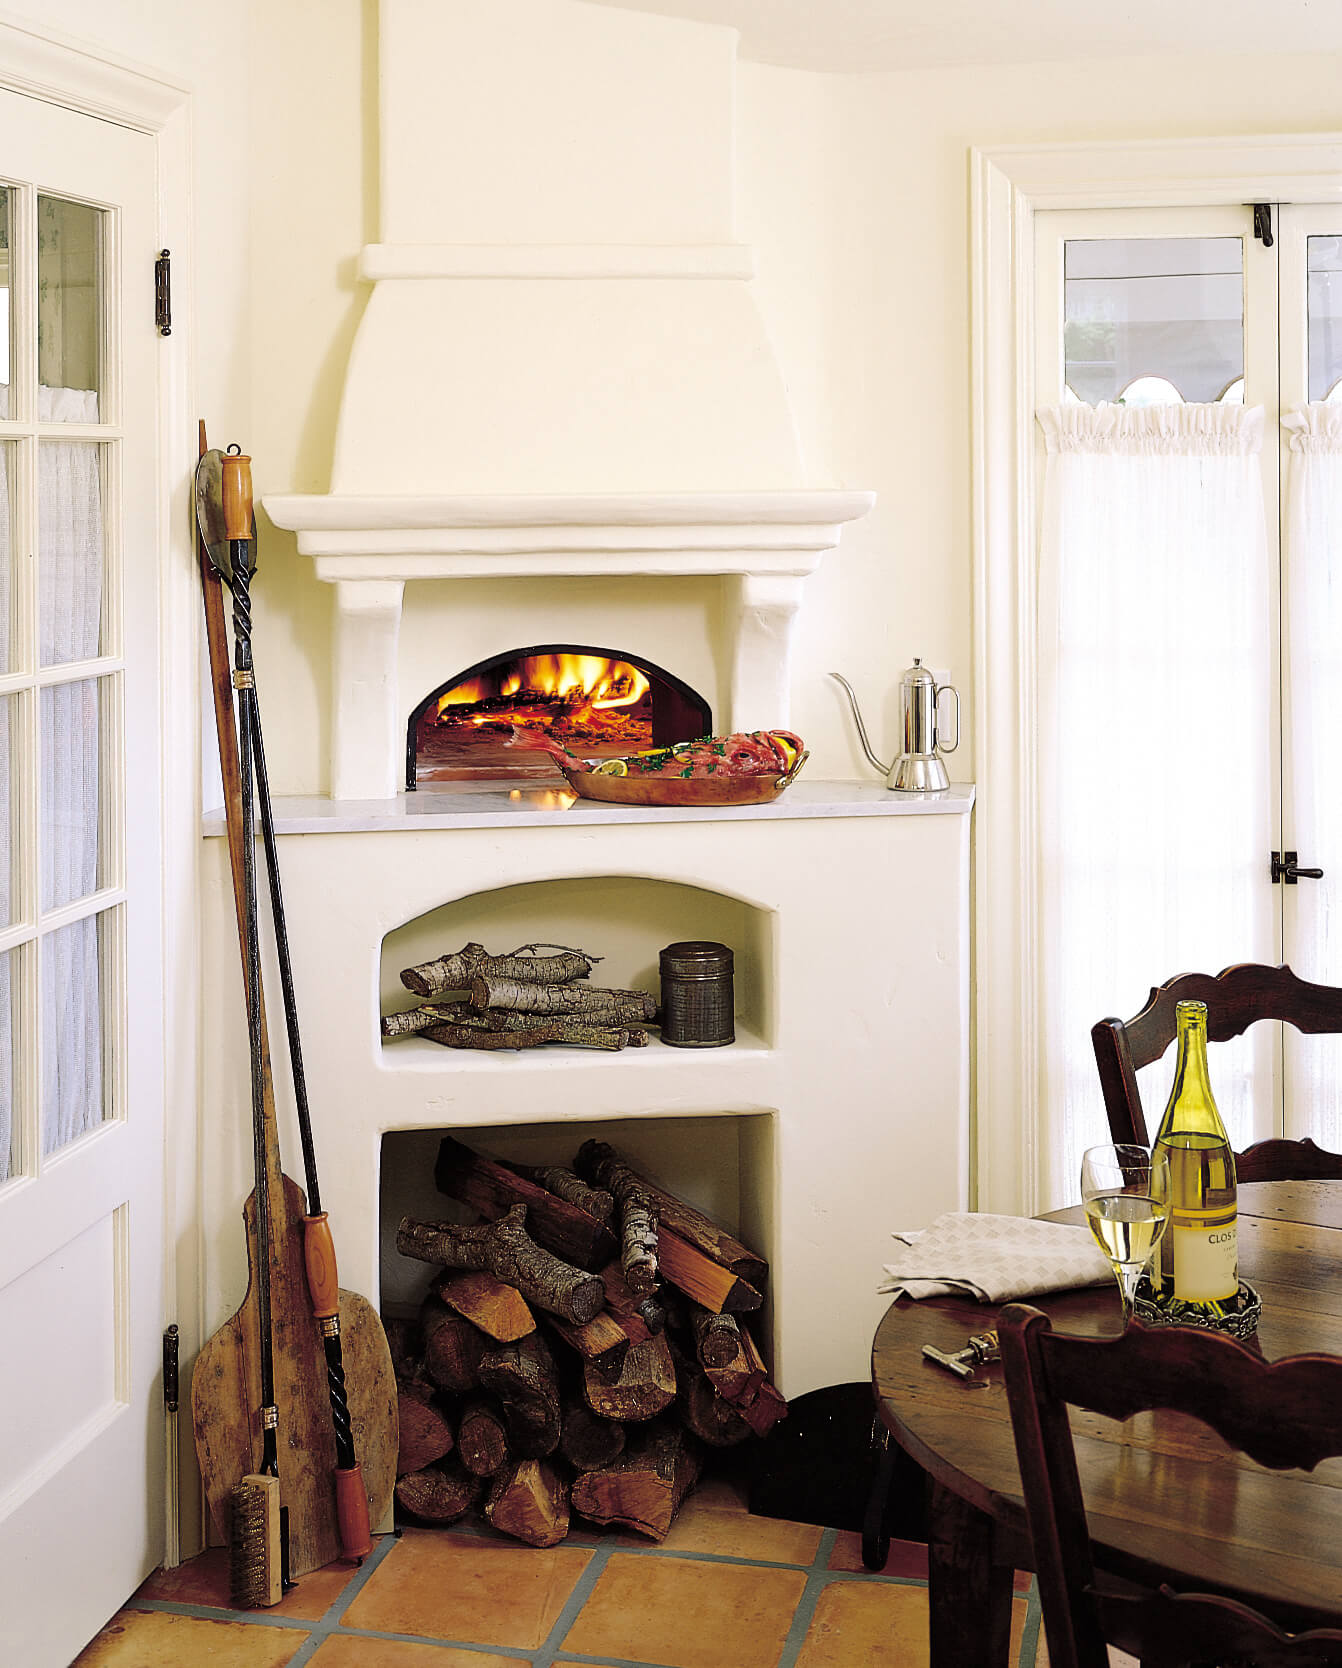 12 Indoor Pizza Oven Design Ideas - Forno Bravo. Authentic Wood Fired Ovens